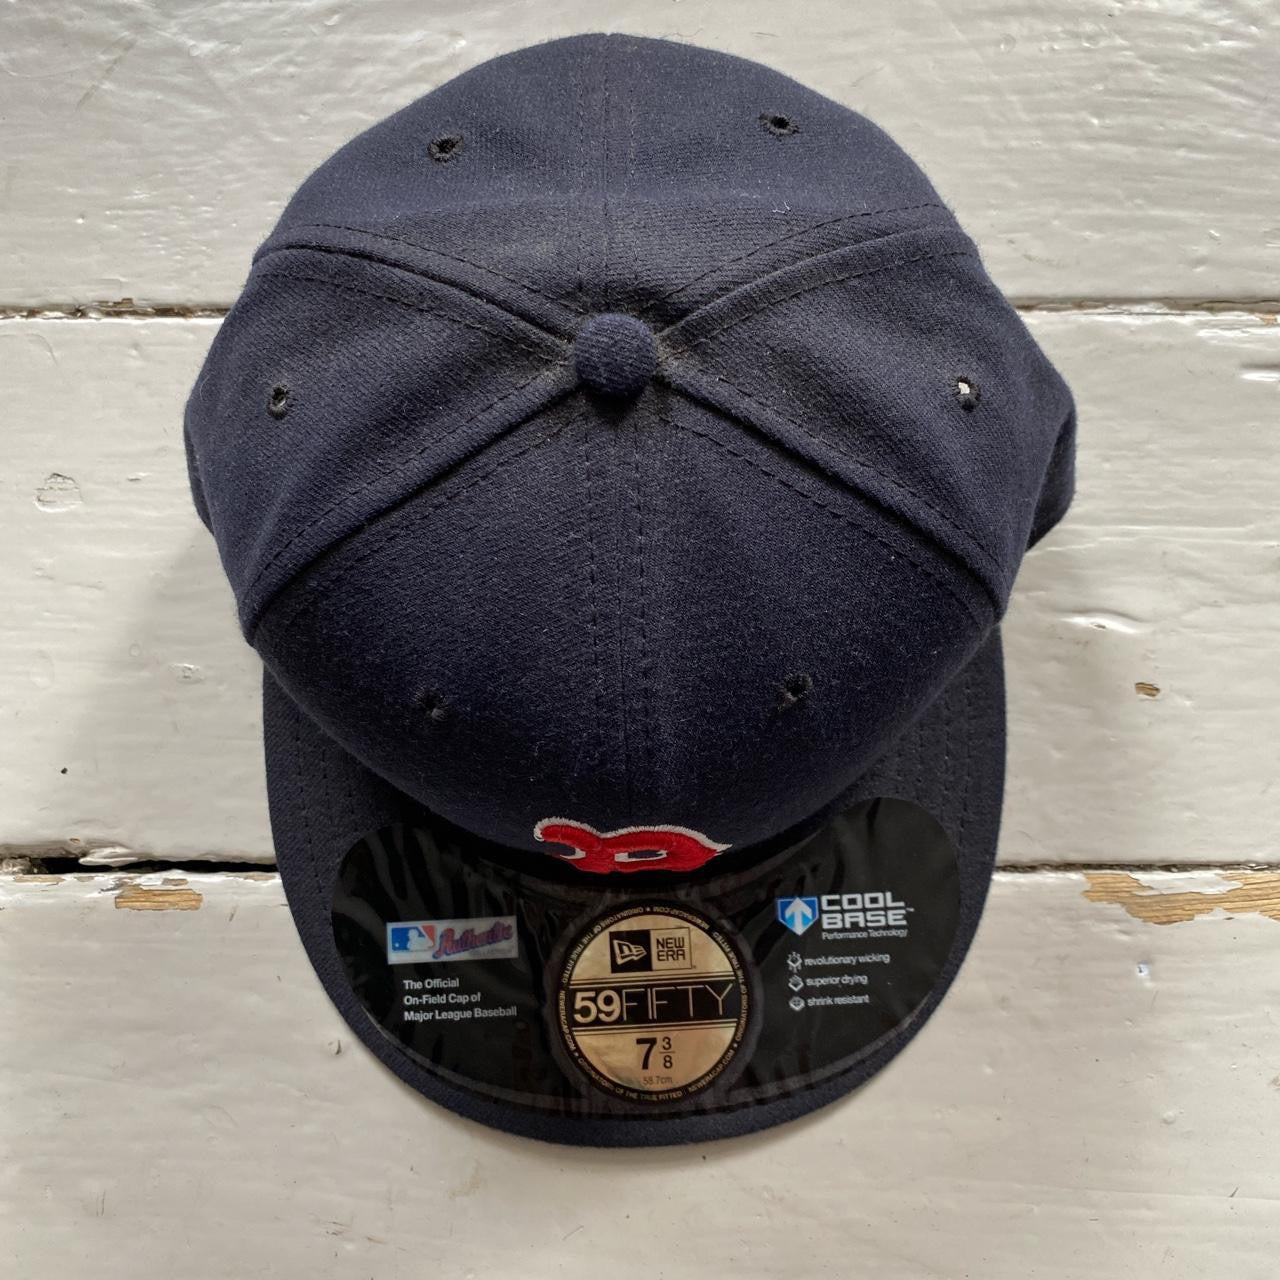 Boston Red Sox Fitted Cap (Size 7 3/8)